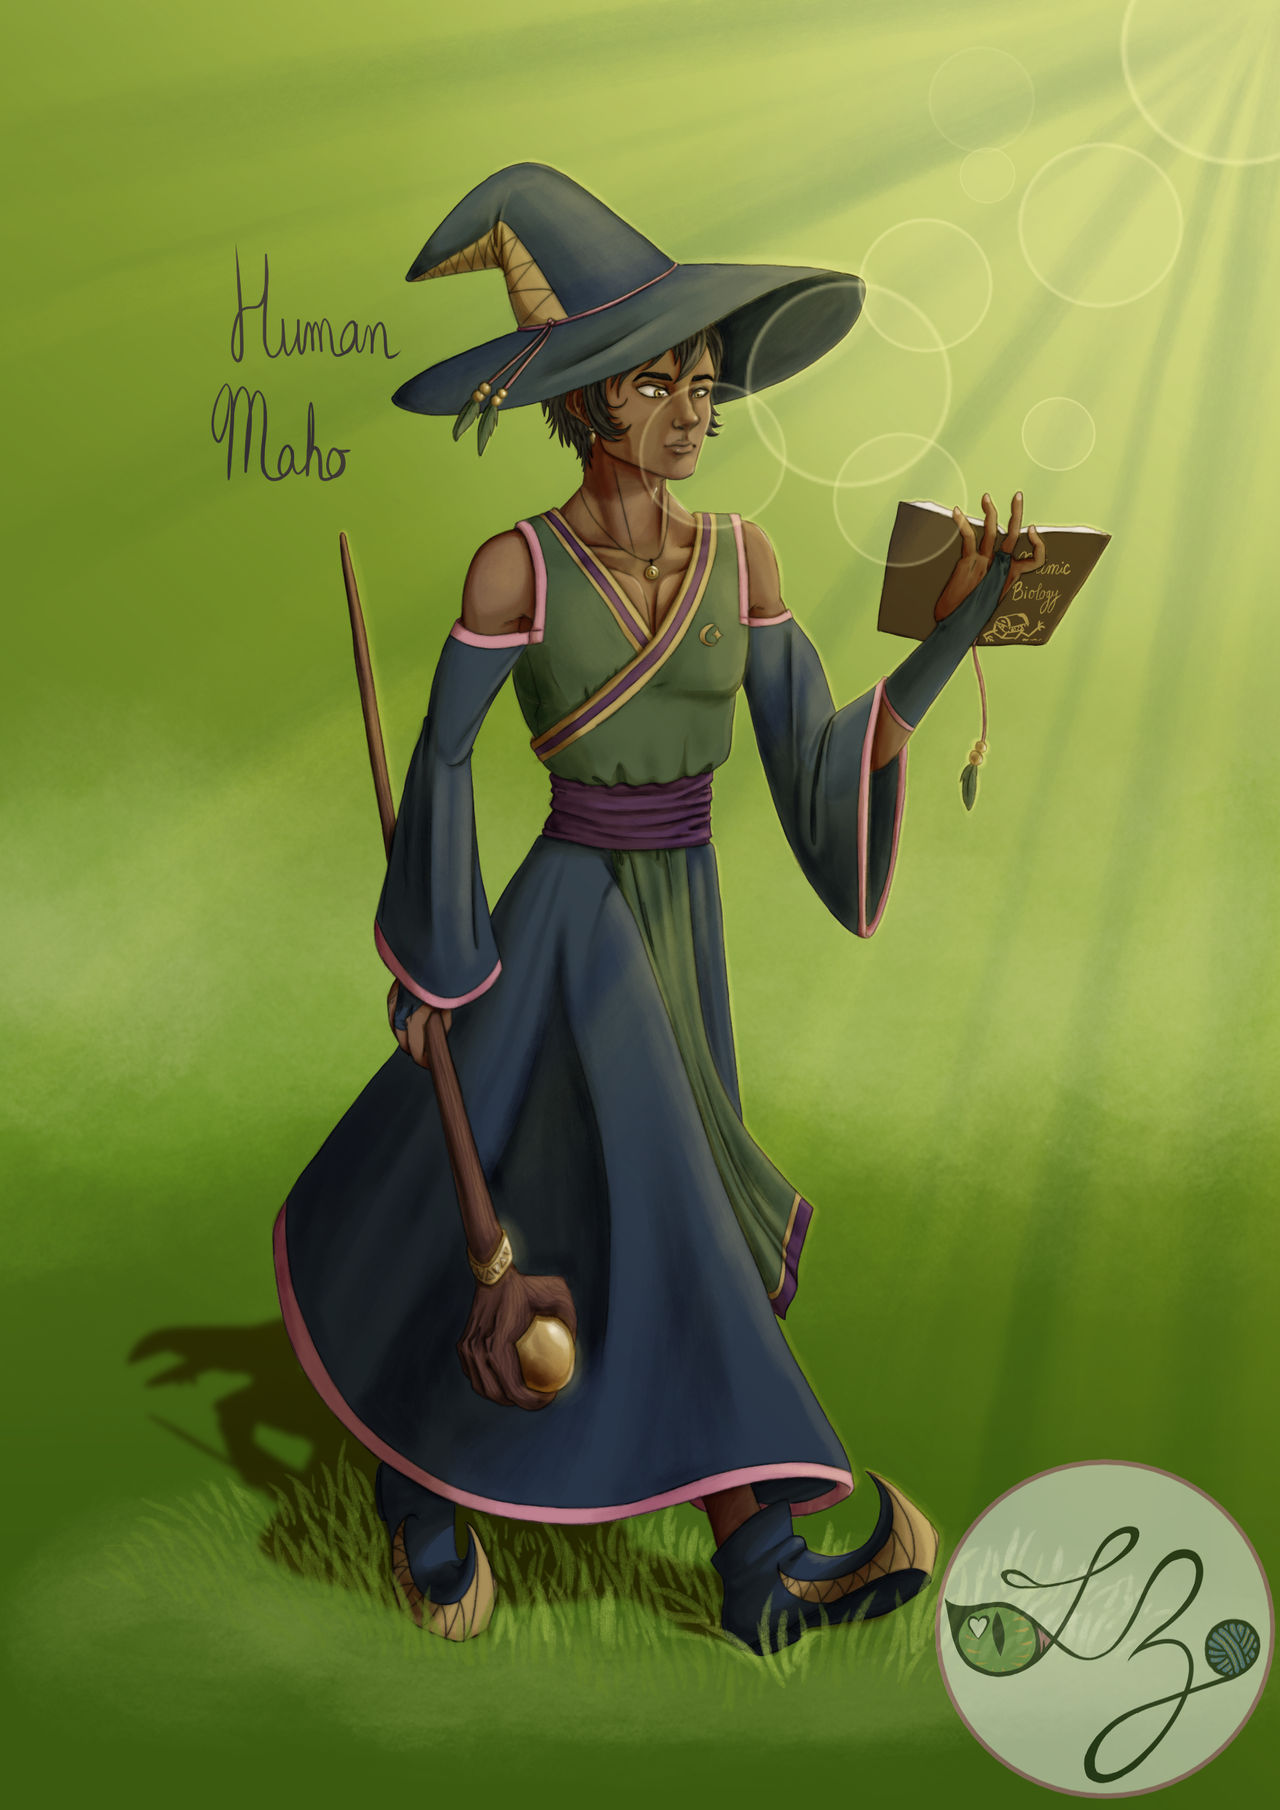 DnD 5e character design- Chuu the Wizard/Rogue, I have been…